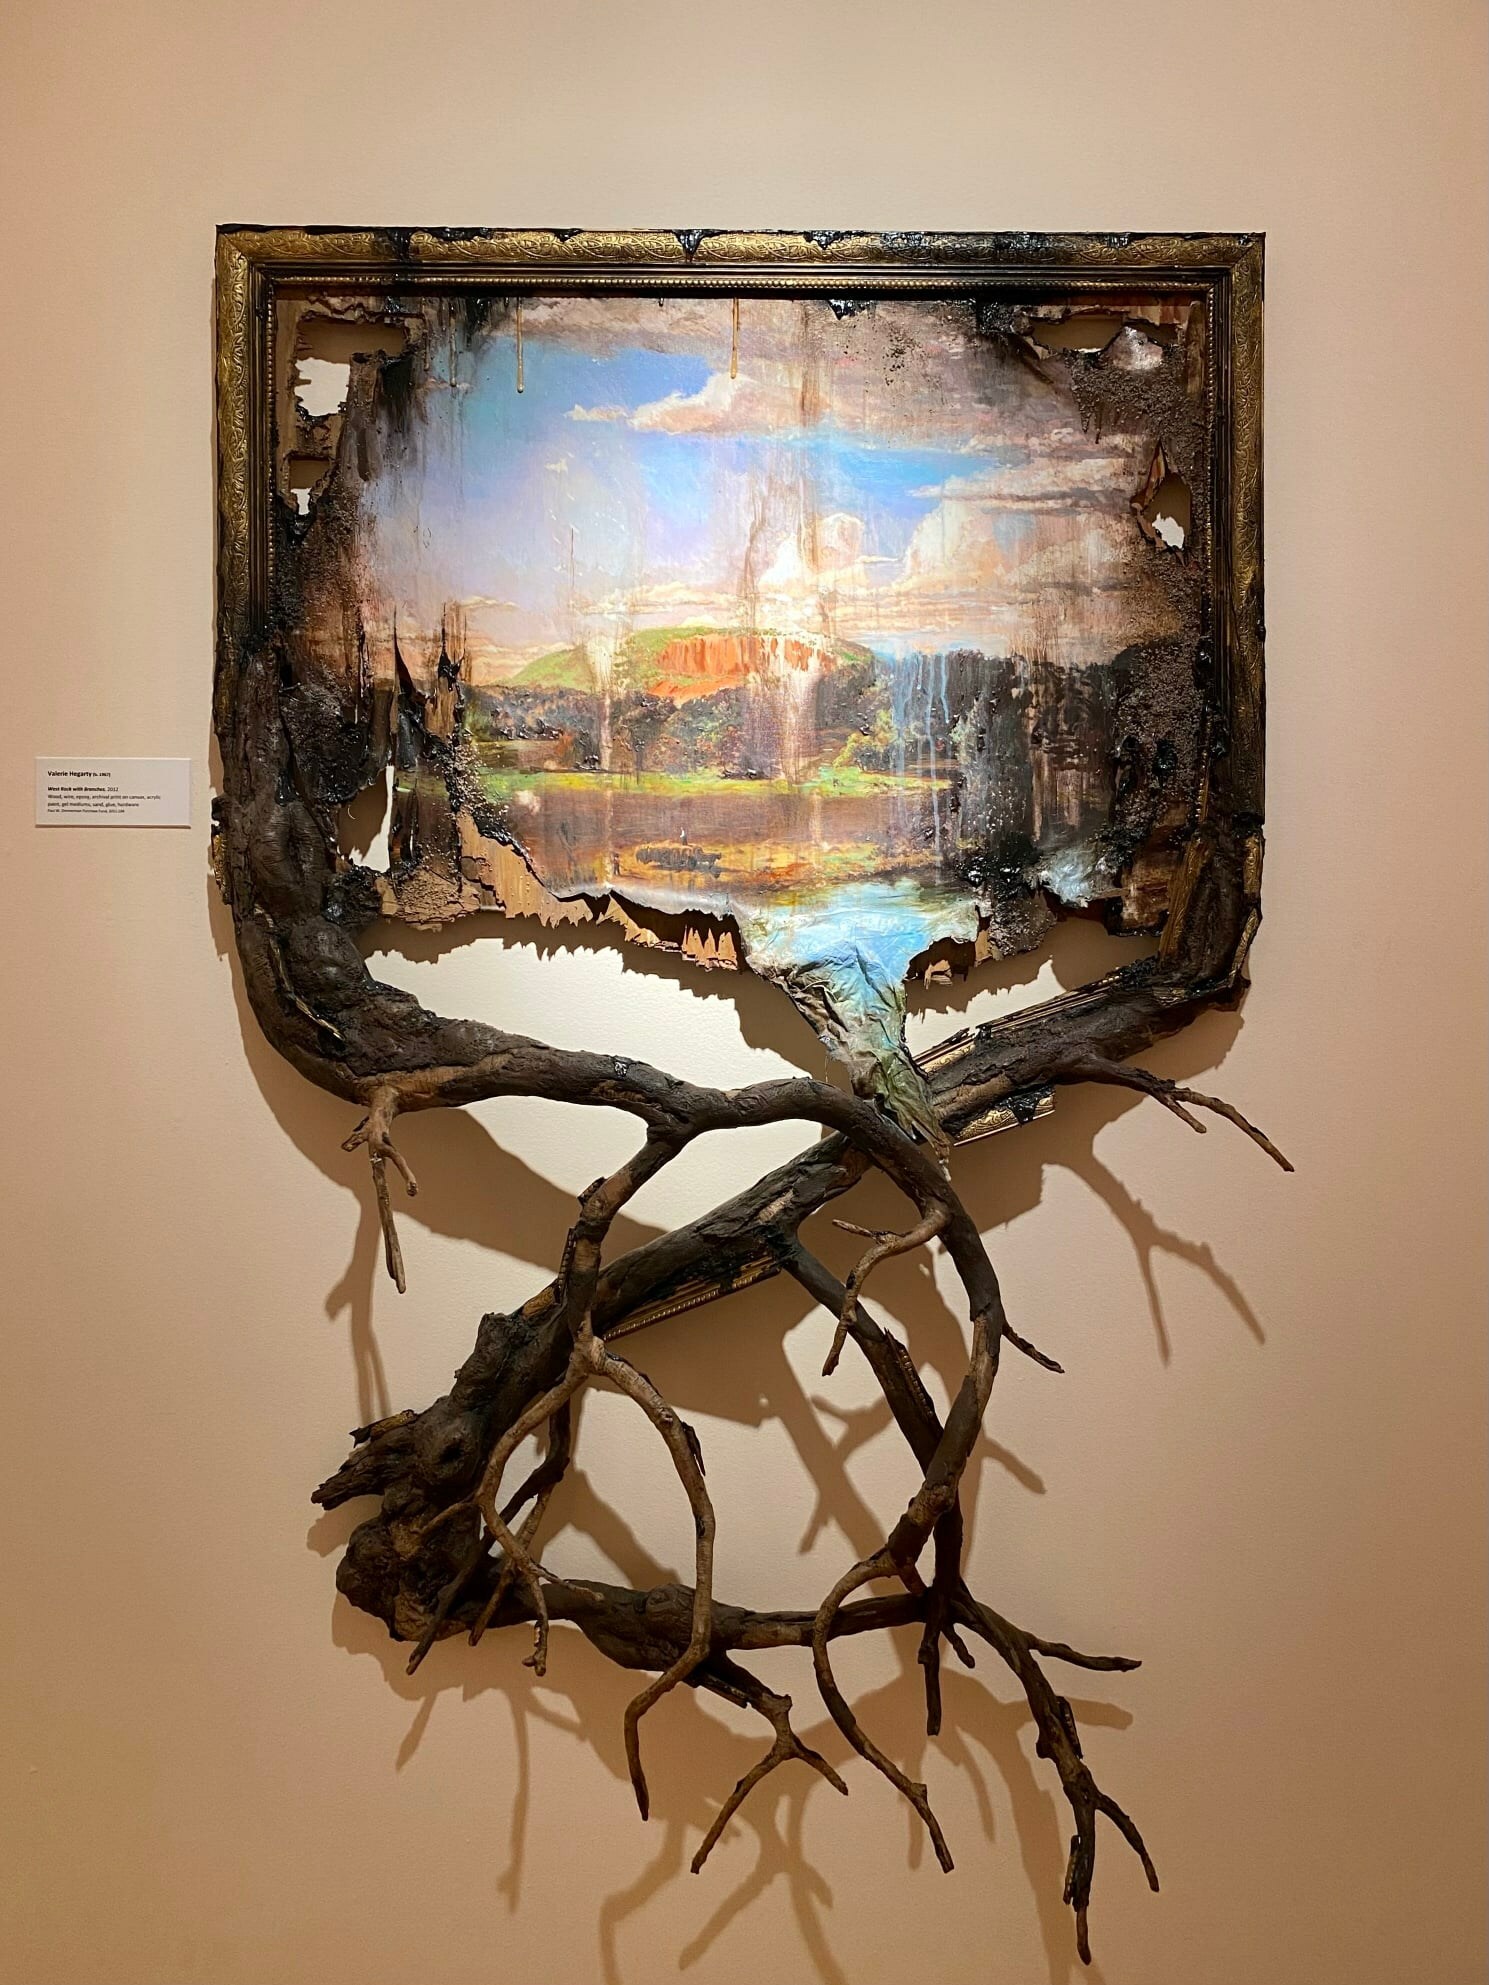 Valerie Hegarty, "West Rock with Branches," 2012, Wood, wire, epoxy, archival print on canvas, acrylic paint, gel mediums, sand, glue, hardware, 65 x 48 x 11 in., Paul W. Zimmerman Purchase Fund, 2011.104